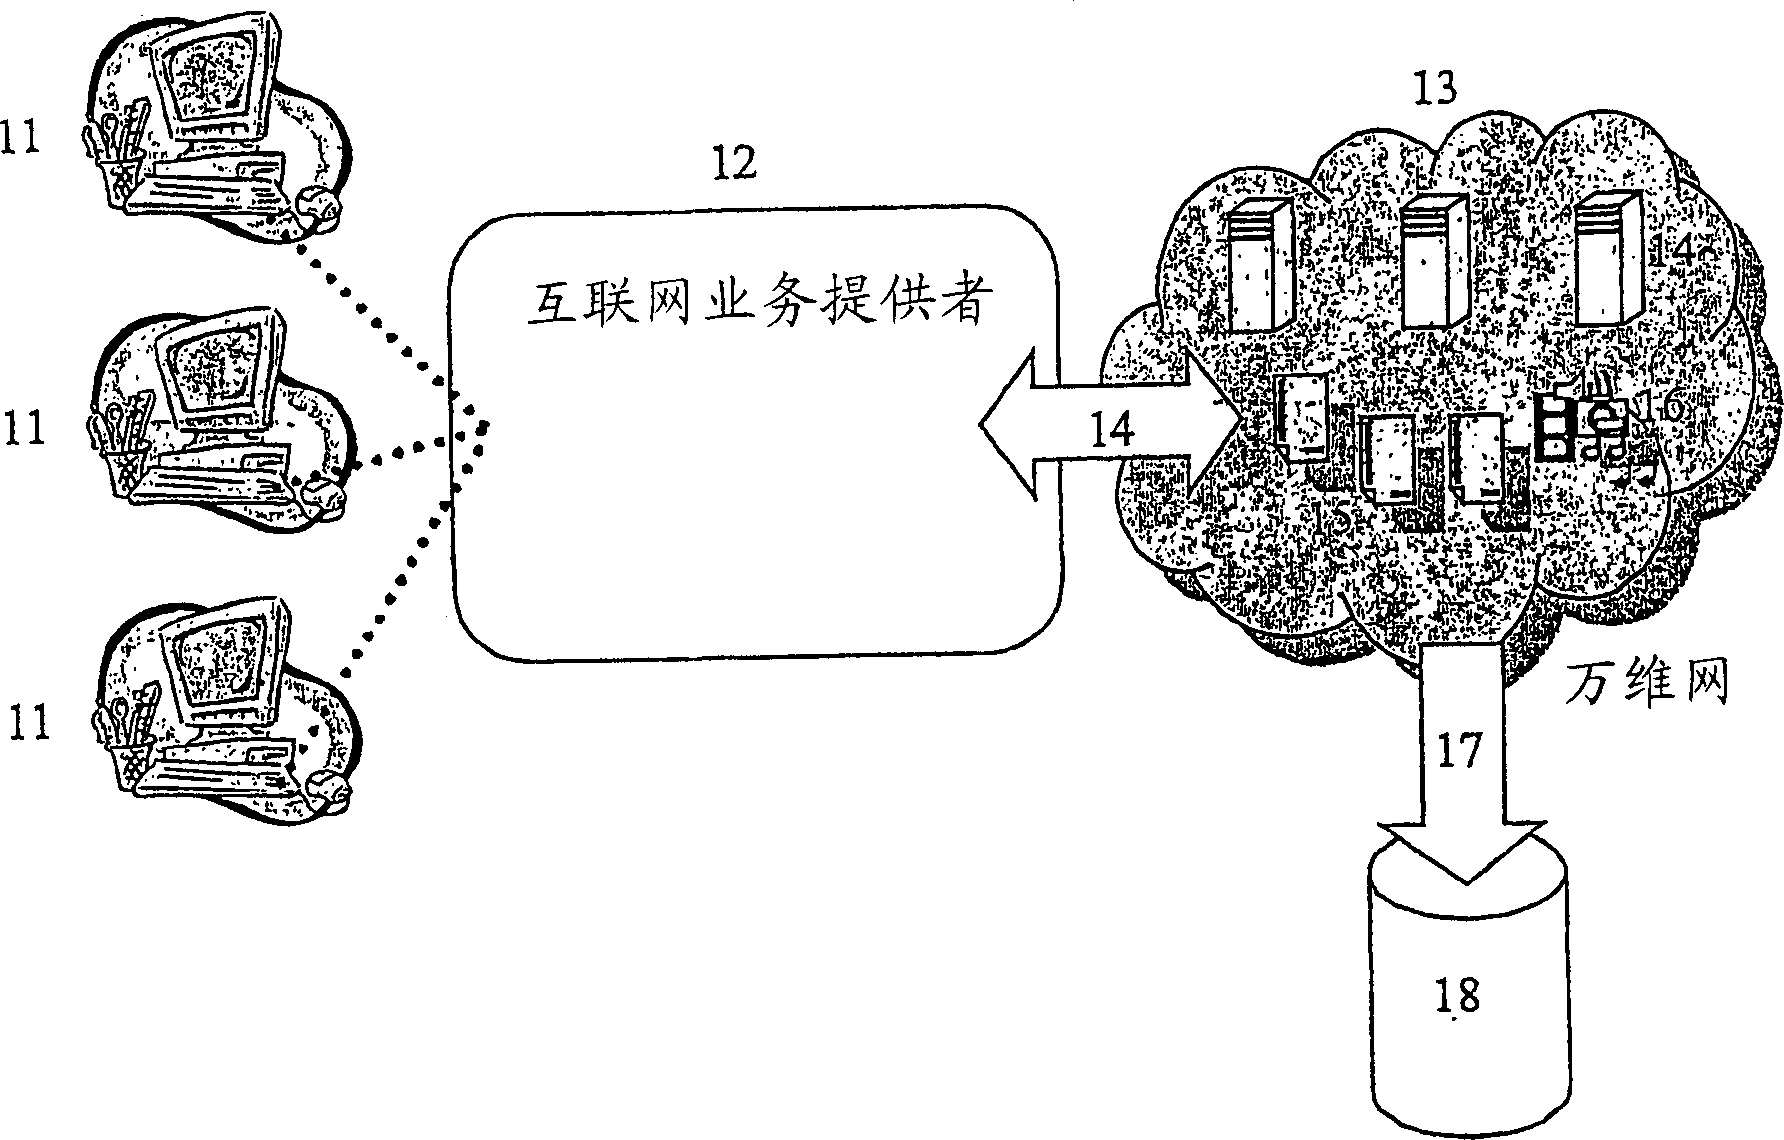 Method for searching and analyzing information in data networks